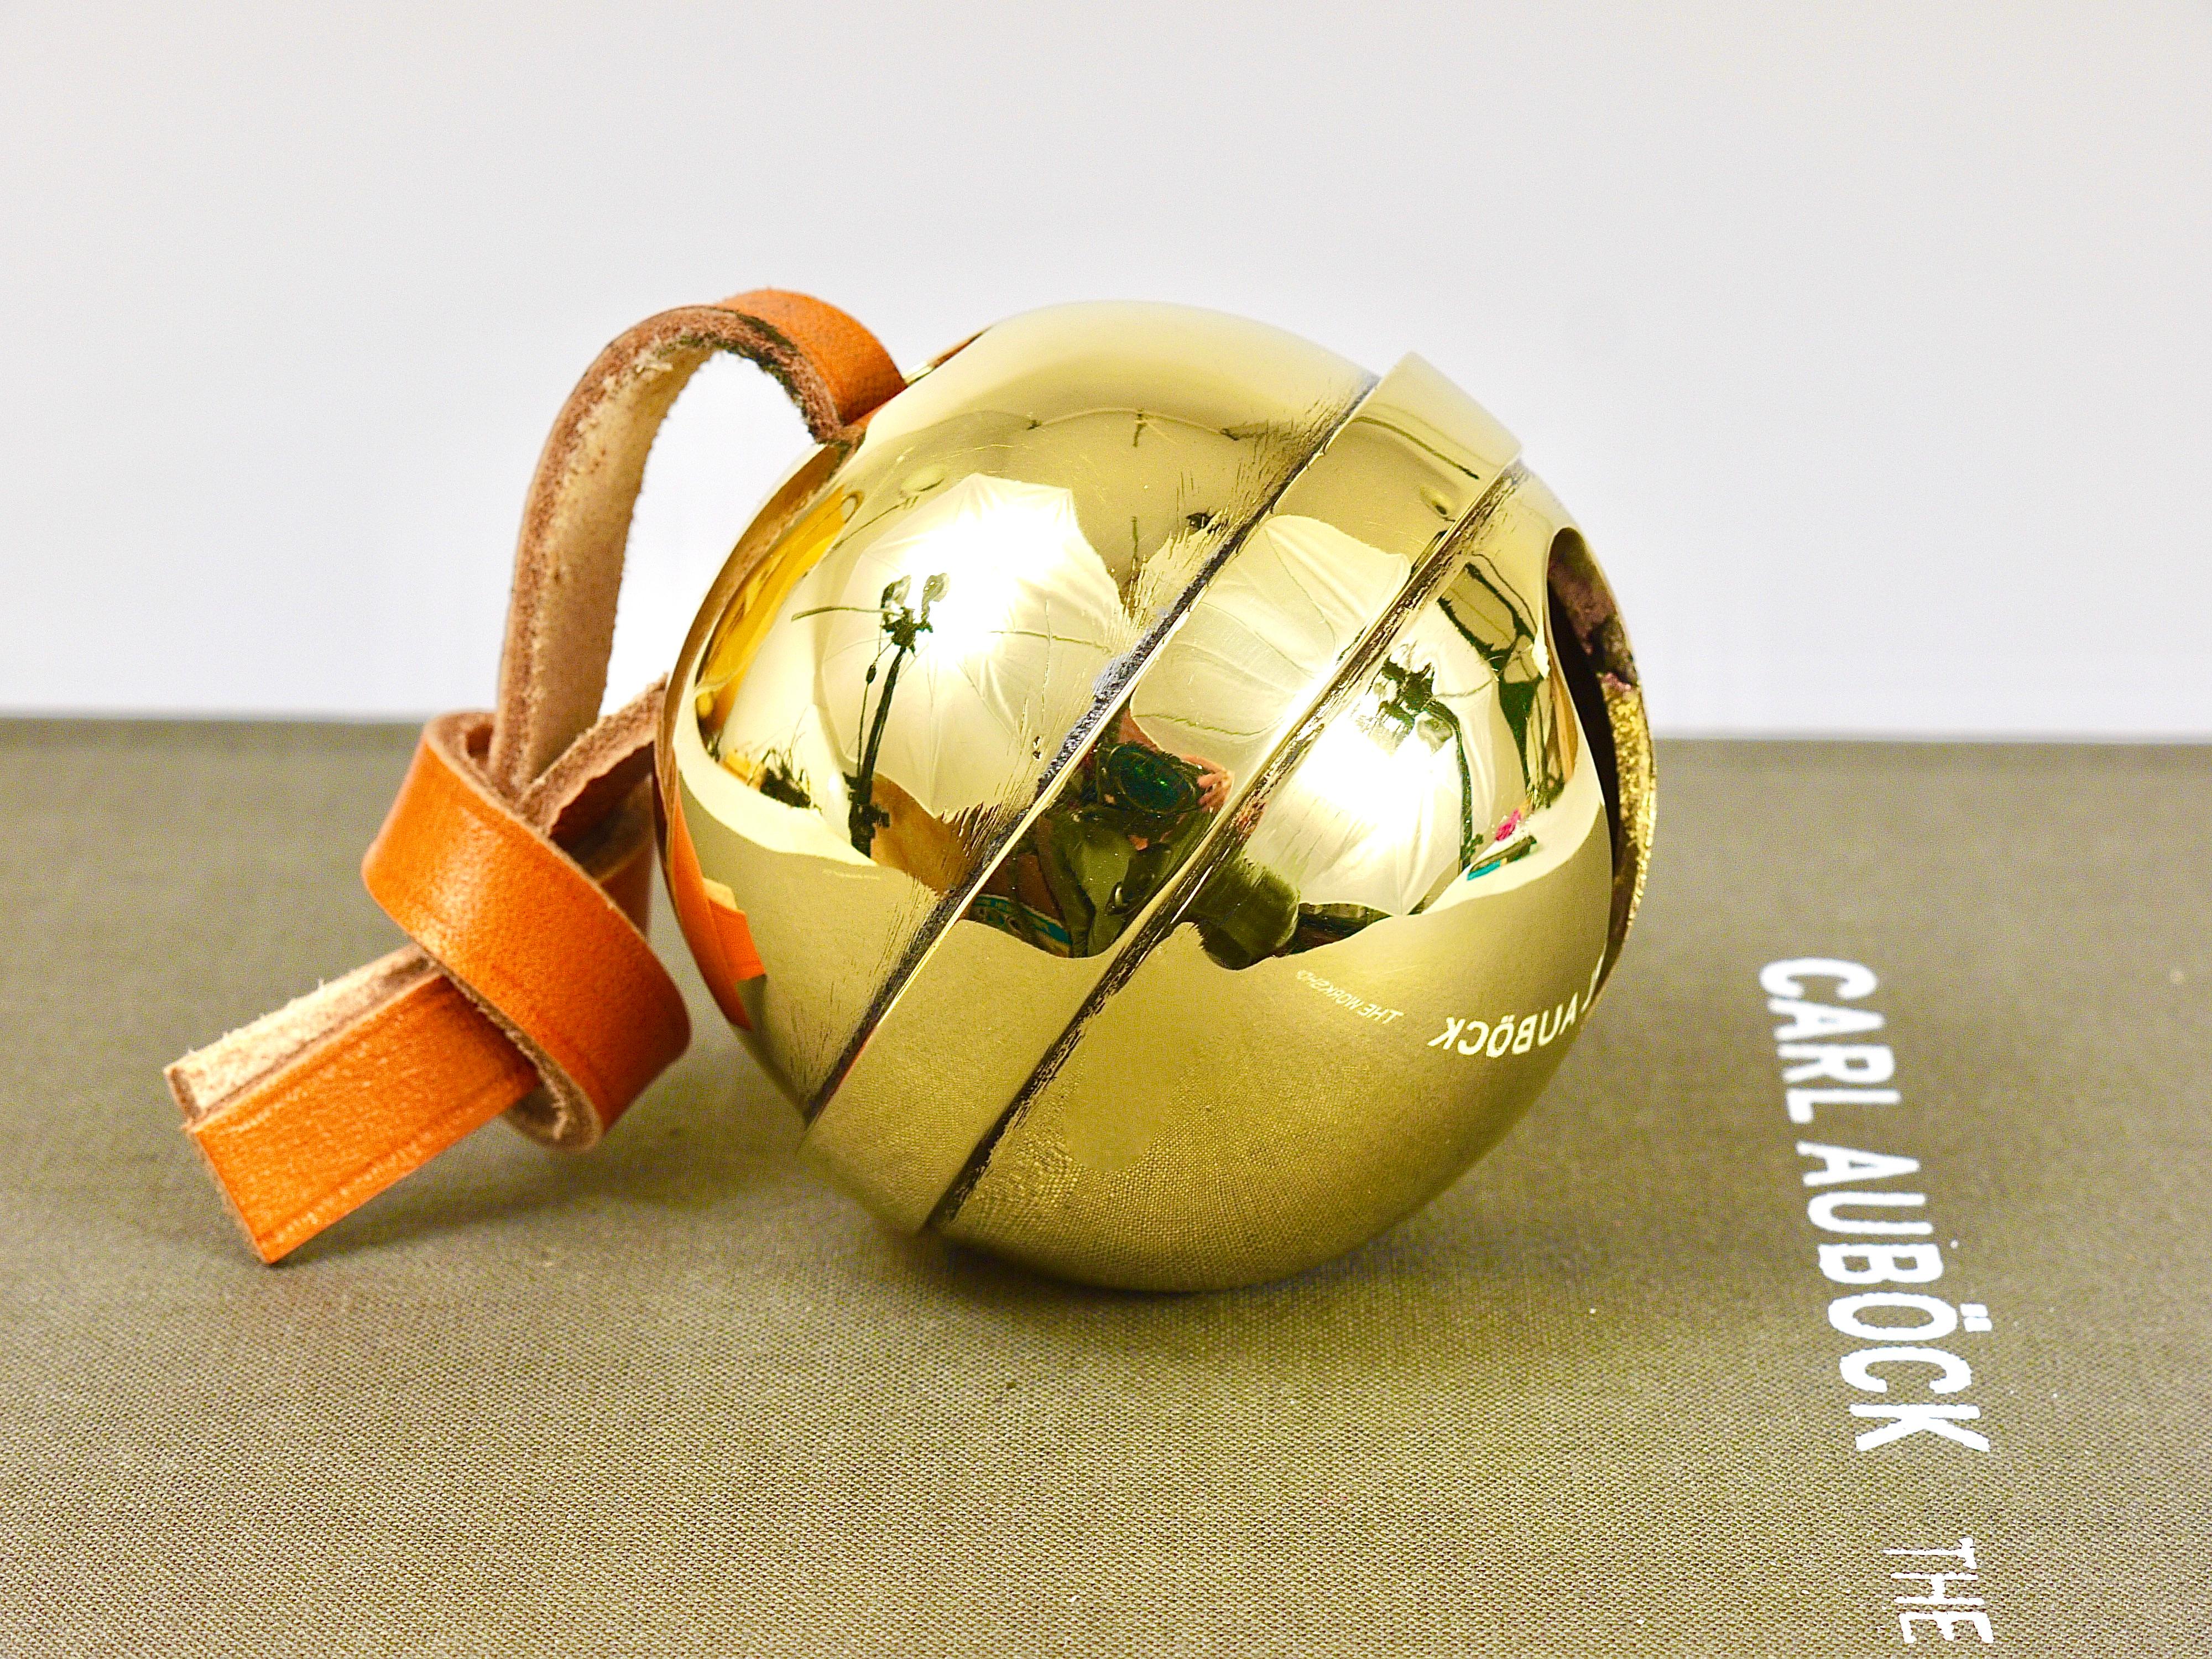 A handmade paperweight in the shape of a sleigh bell, model #5039, originally designed by Carl Aubock III back in the 1960s. A very charming piece, reissued by Werkstätte Auböck in Vienna / Austria. Handmade of polished brass with a leather strap,